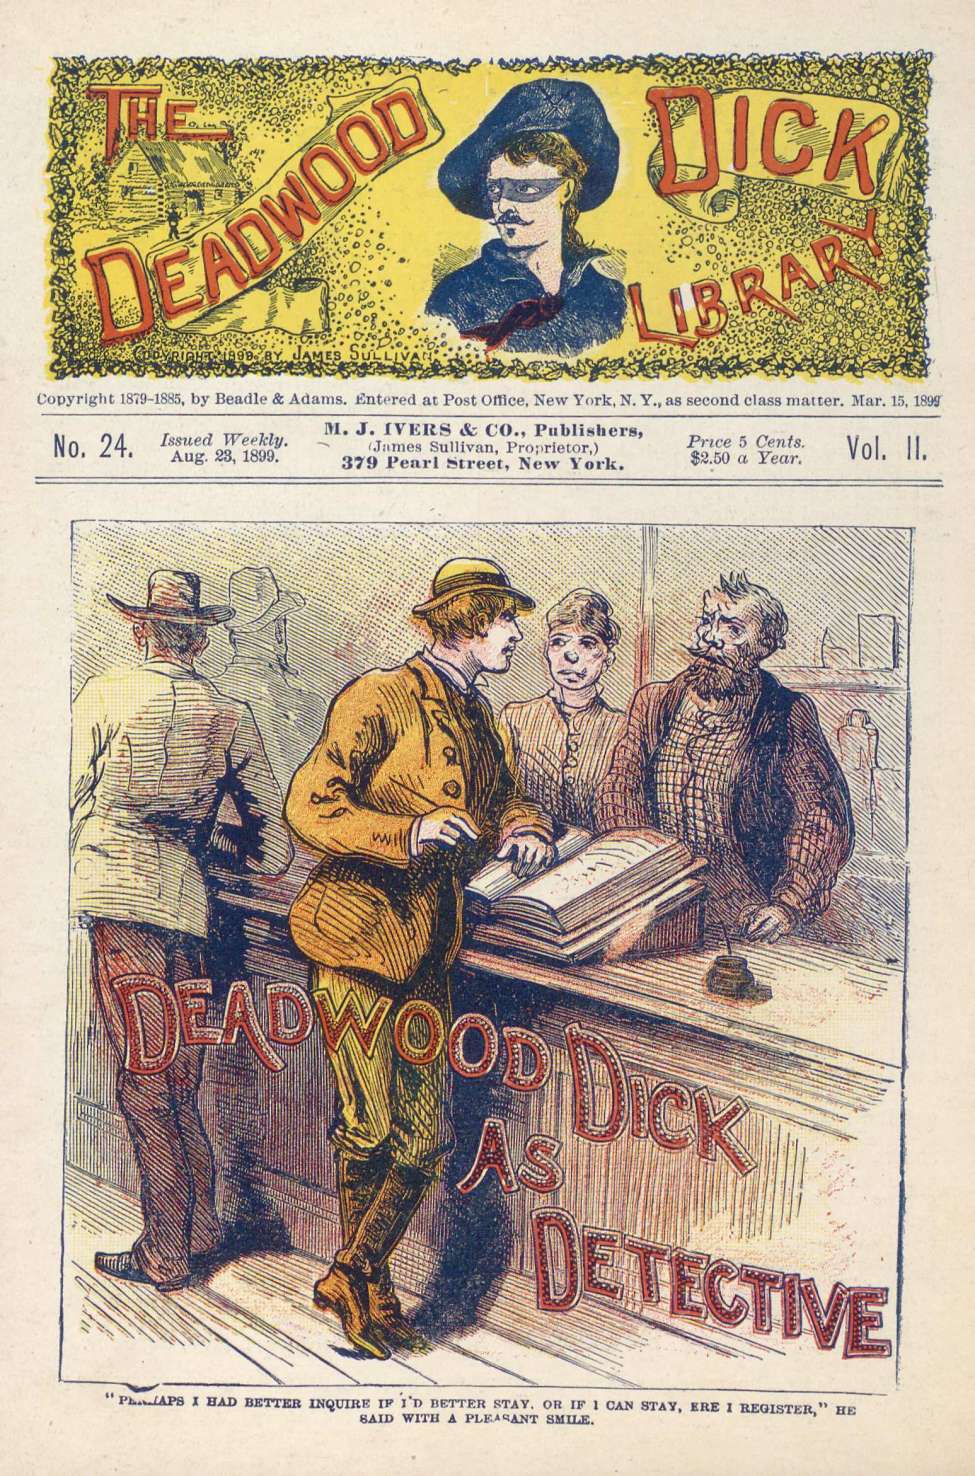 Book Cover For Deadwood Dick Library v2 24 - Deadwood Dick as Detective